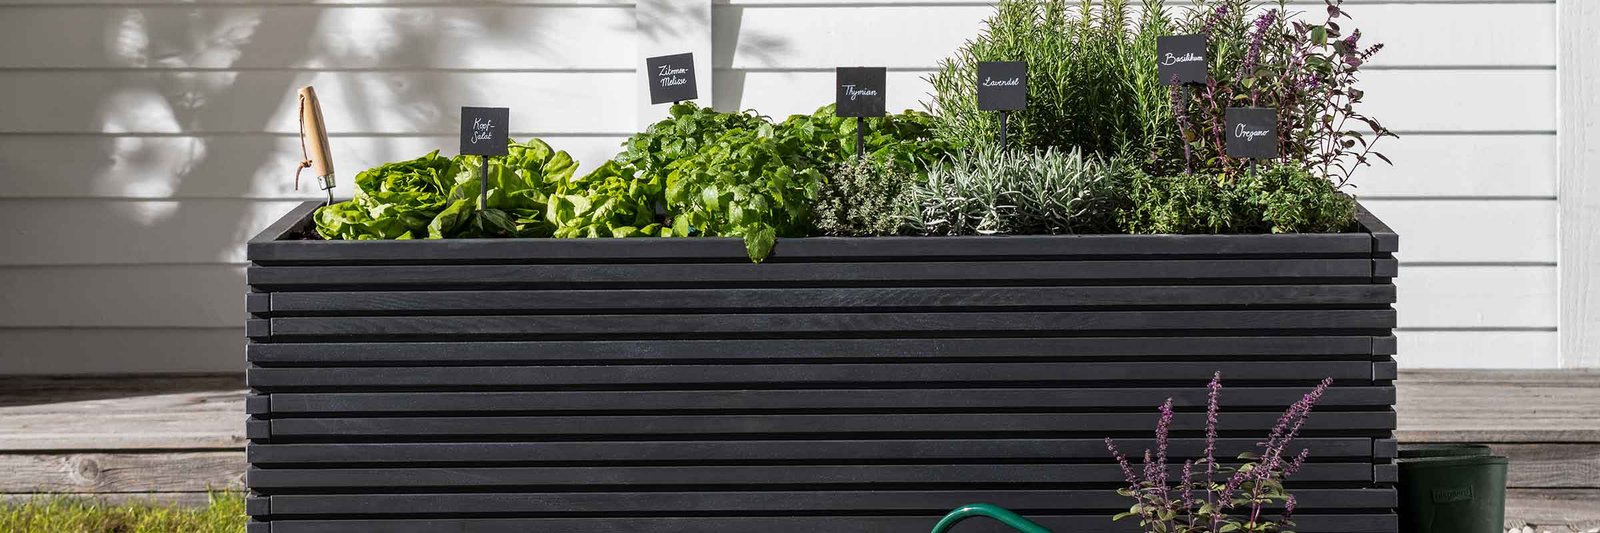 Raised beds and their advantages for hobby gardeners and the